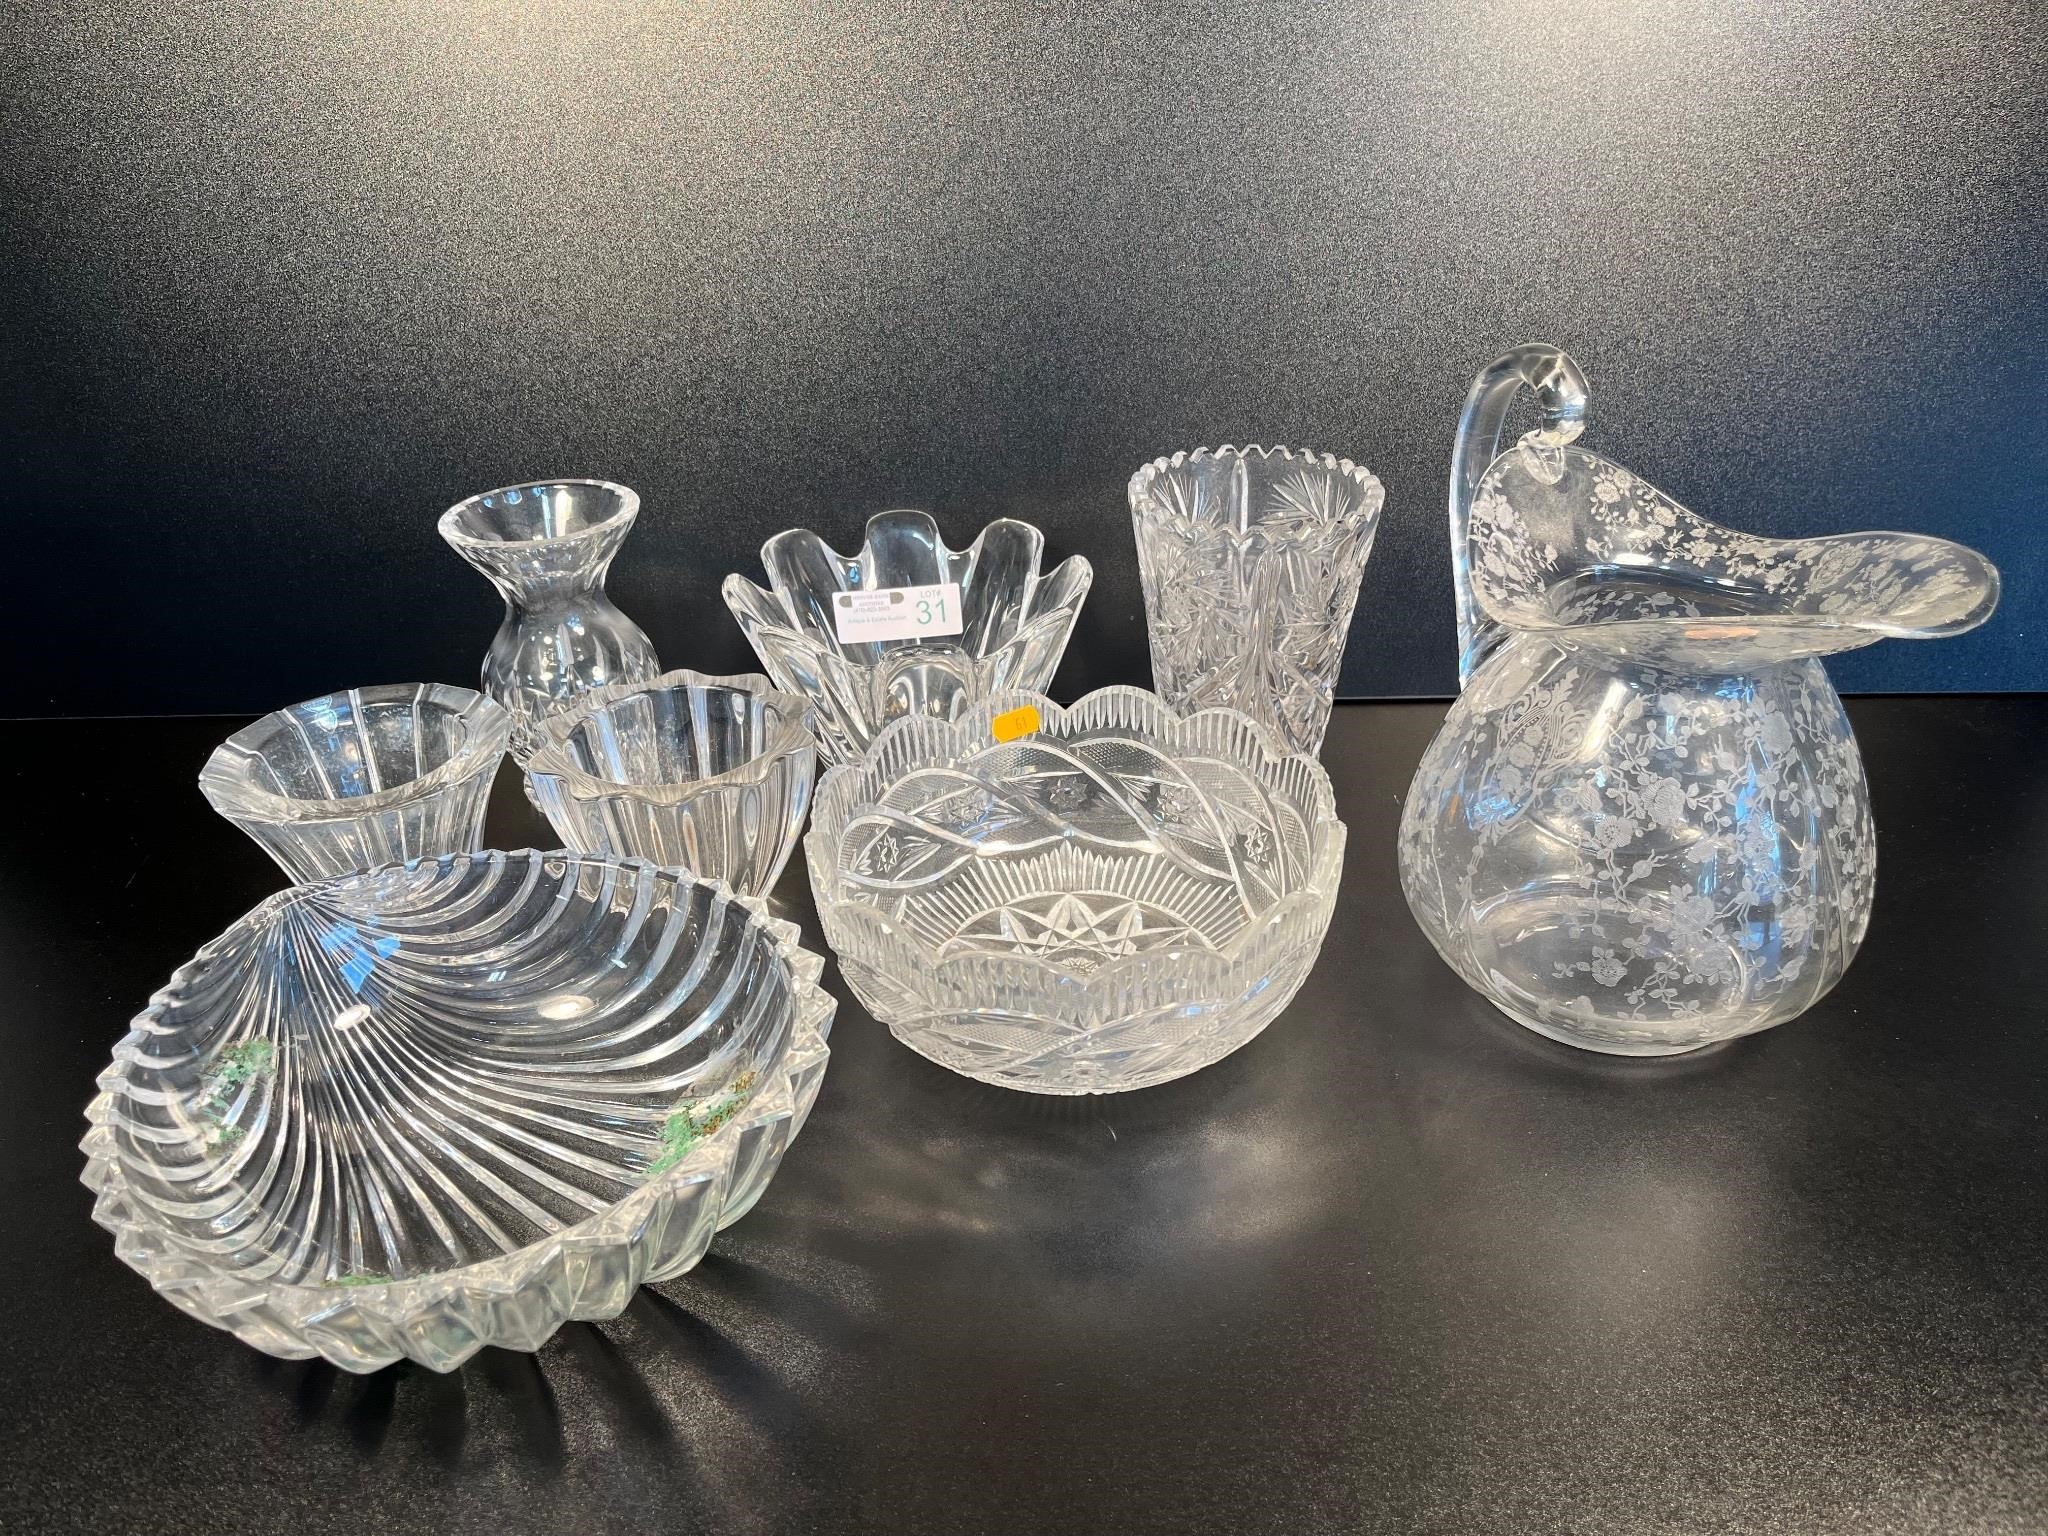 Misc. Crystal Serving Pieces: Orfers, etc.